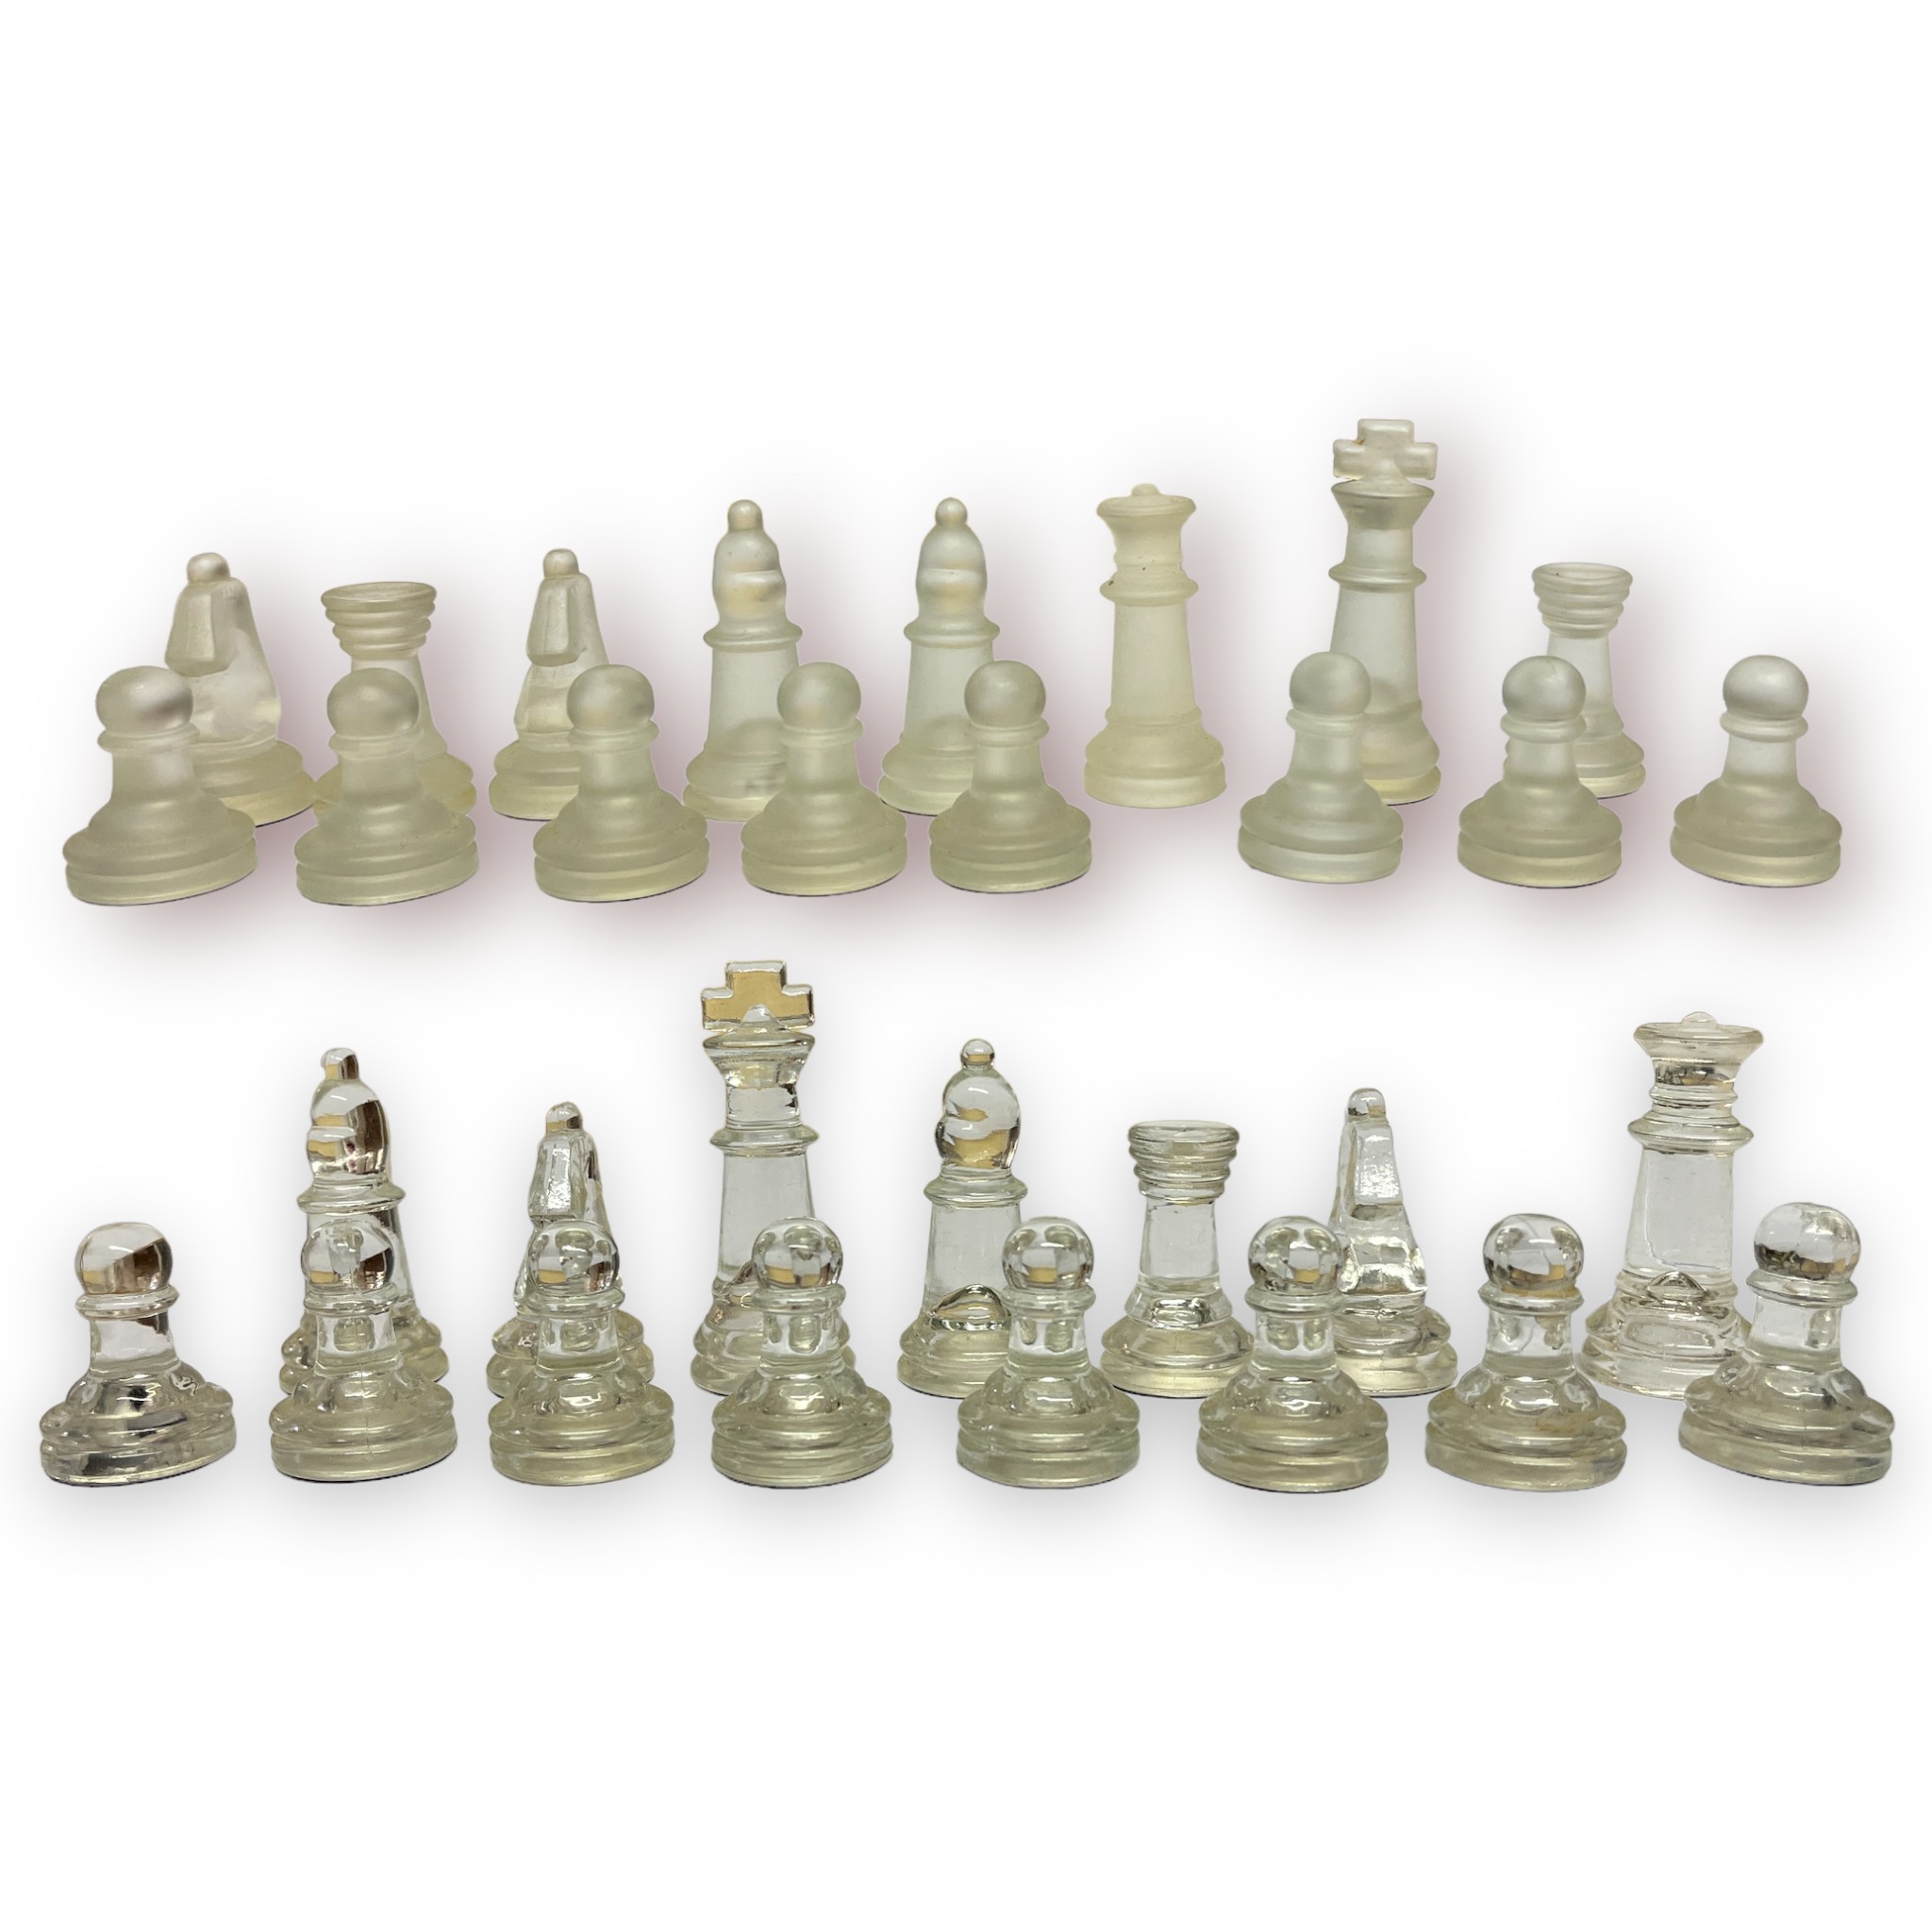 Two glass chess sets, with glass board and a wooden Staunton pattern chess set, together with two - Image 2 of 15